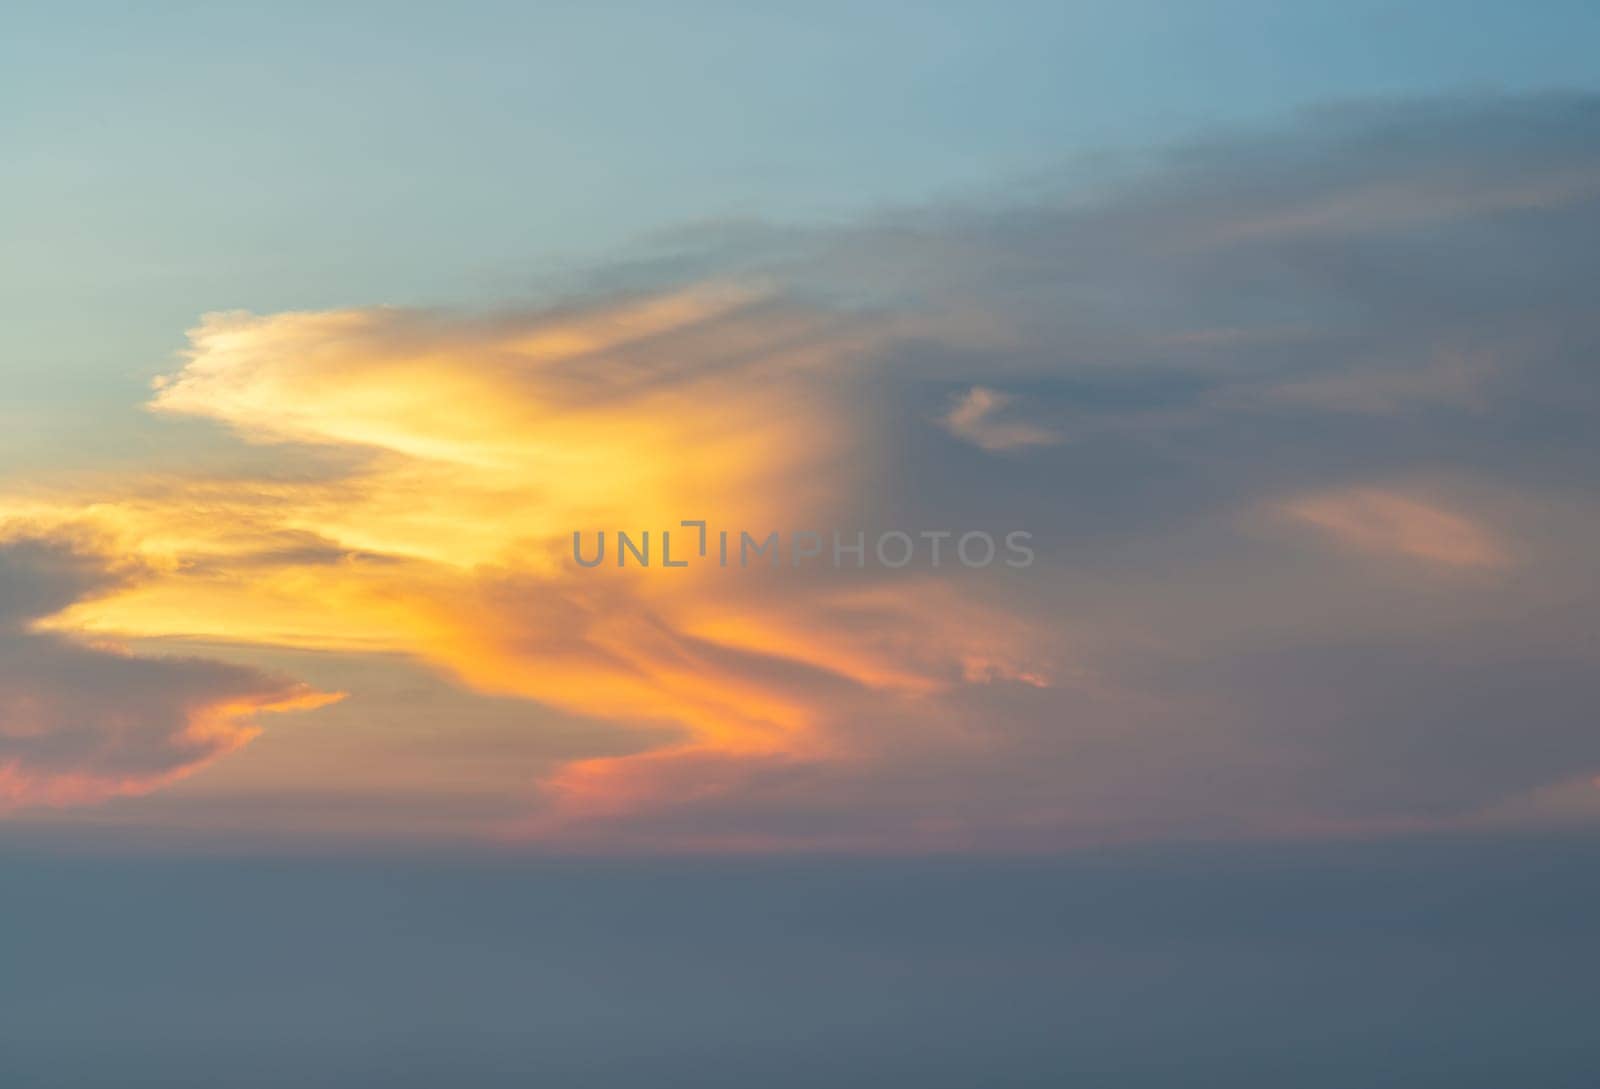 Evening sky scene with light from the setting sun, Last light of the day, The Stunning Beauty of a Sunset. by tosirikul